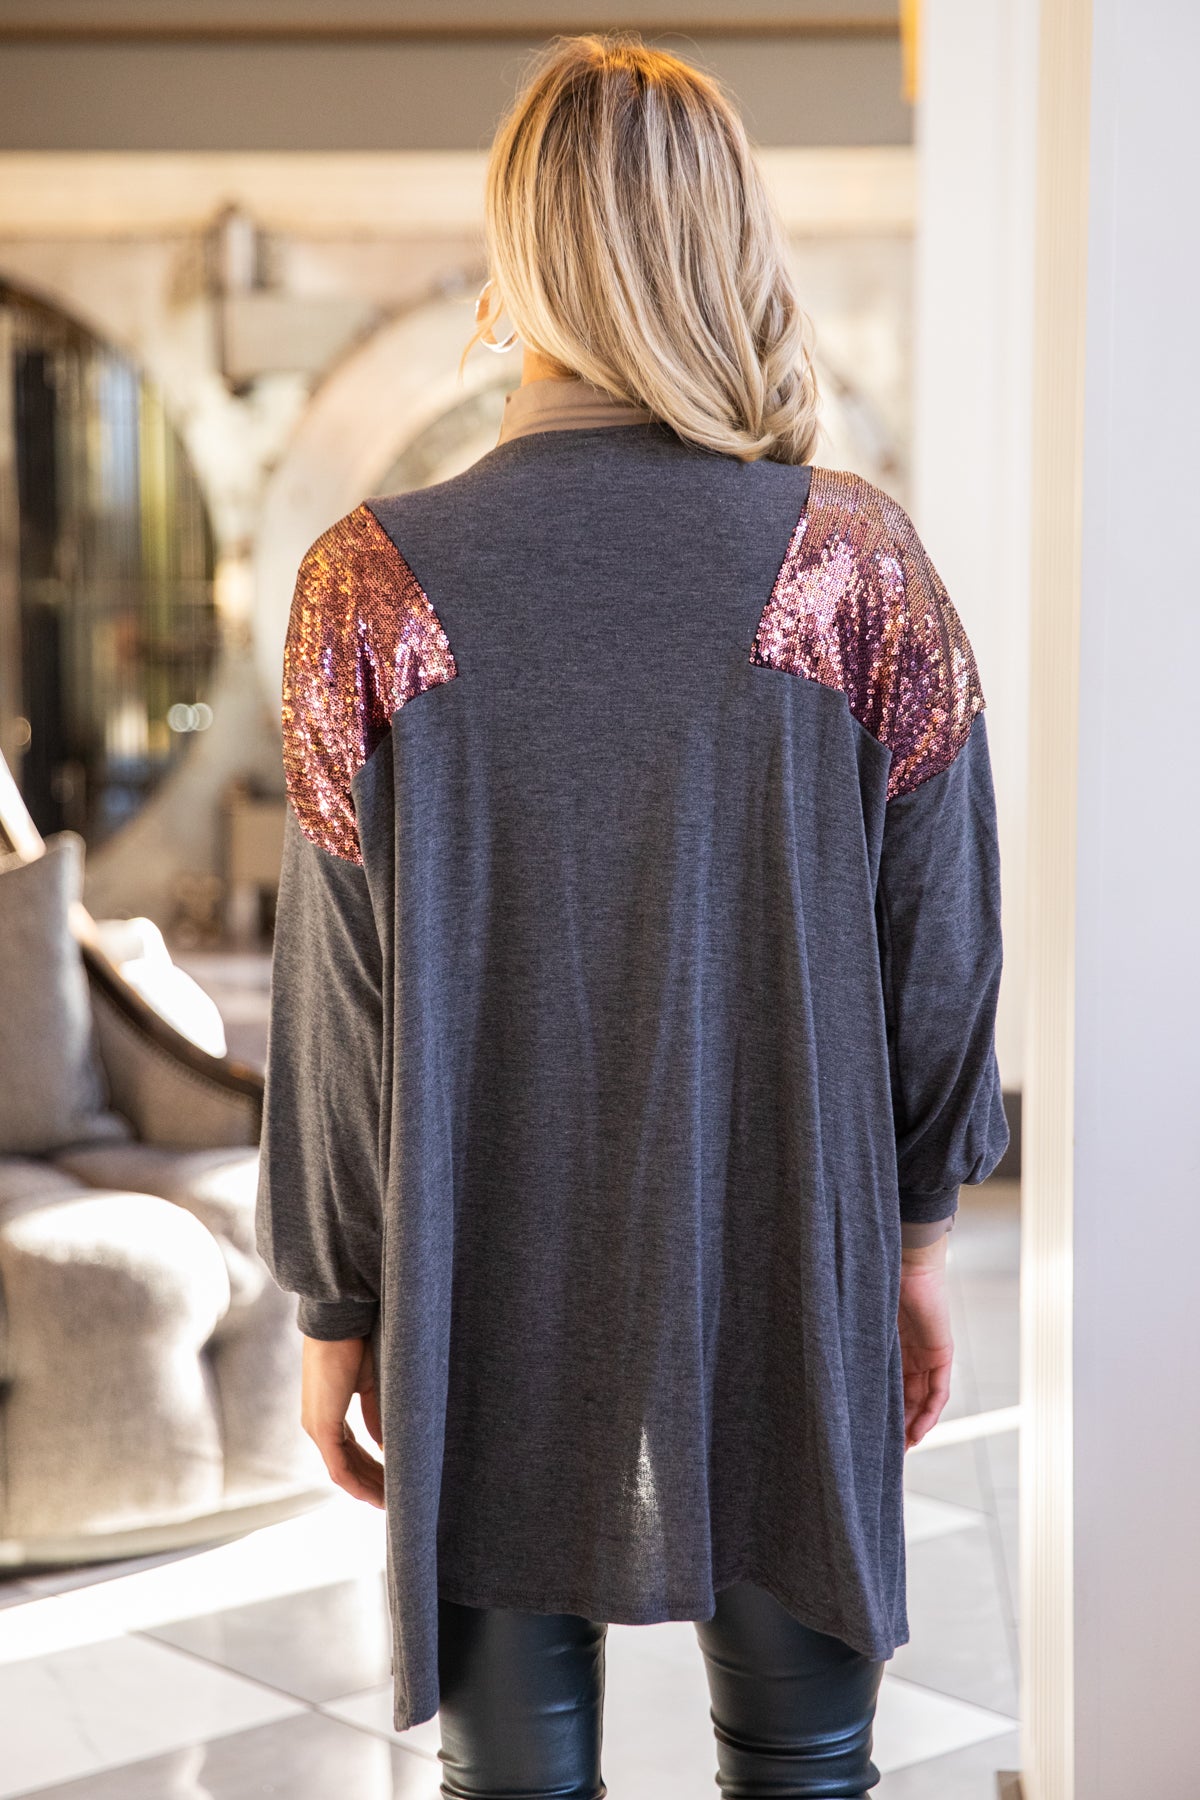 Grey Cardigan With Sequin Shoulders - Filly Flair